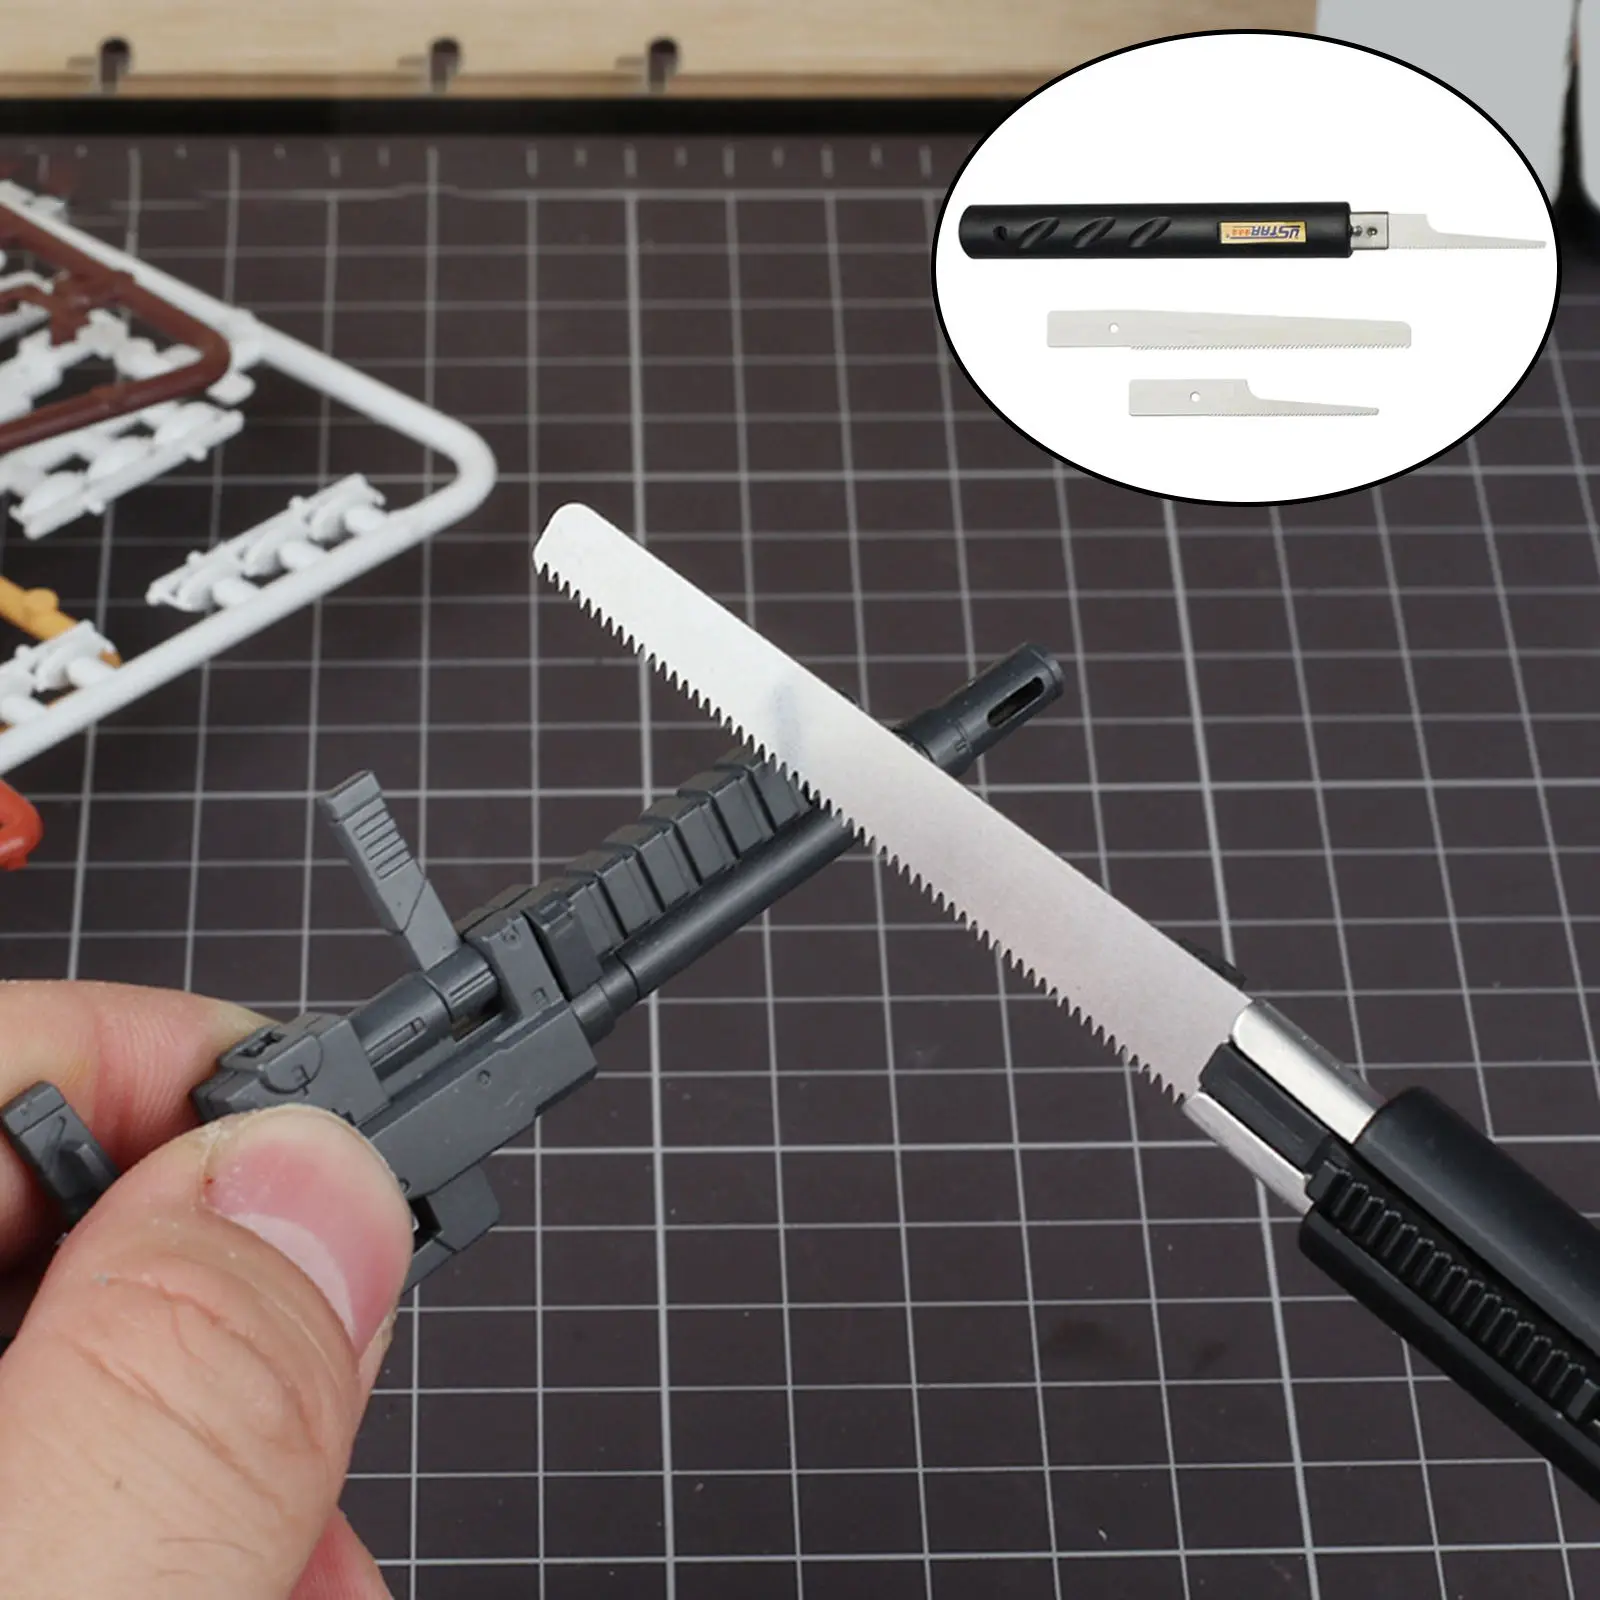 Mini Saw Tools Hand Cutting Exquisite Craft Cutter DIY Anti-Slip Craft Tool Kit Model Carving Small Hand Saw for U-Star UA92600